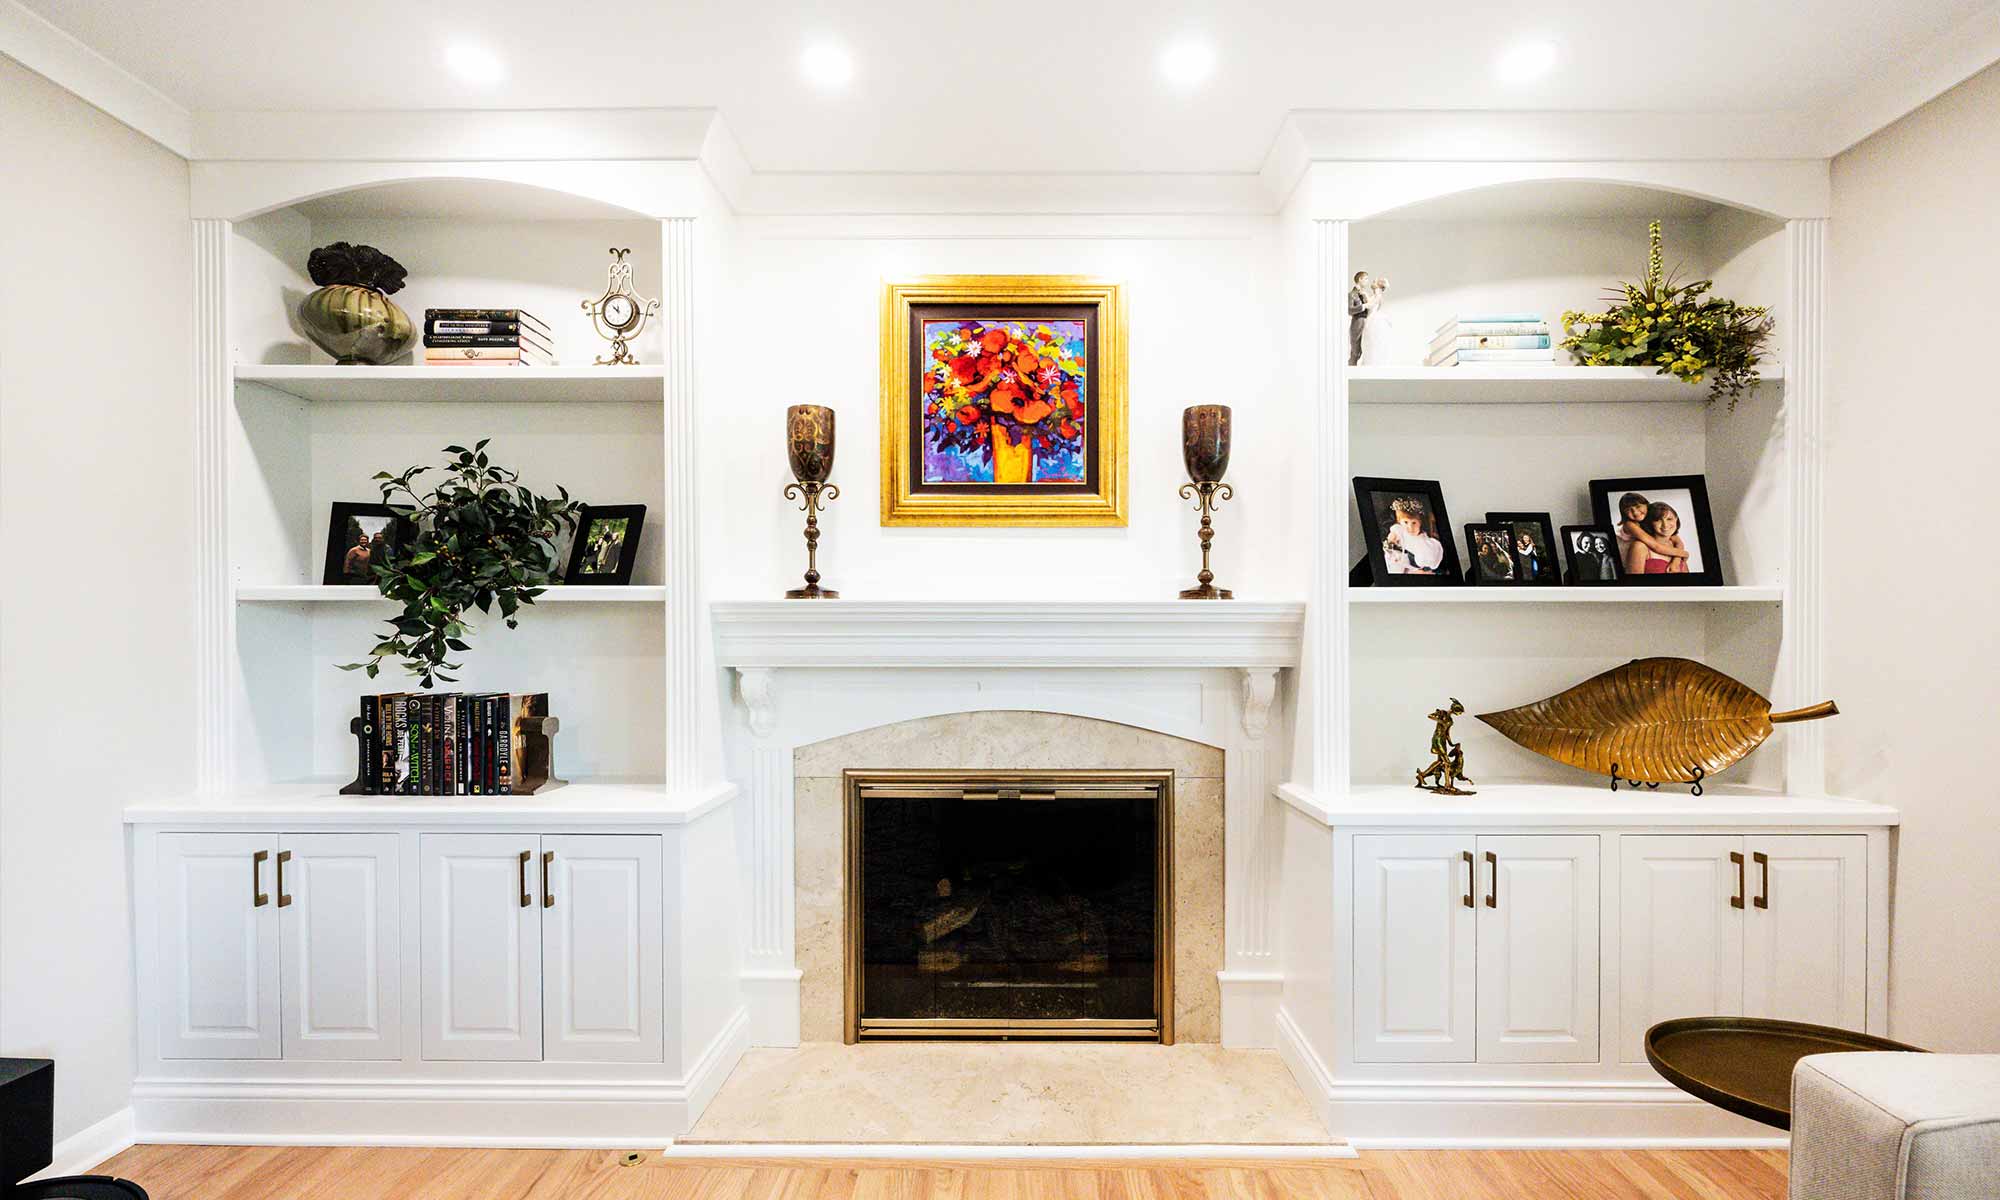 A fireplace with shelves and a painting on the wall